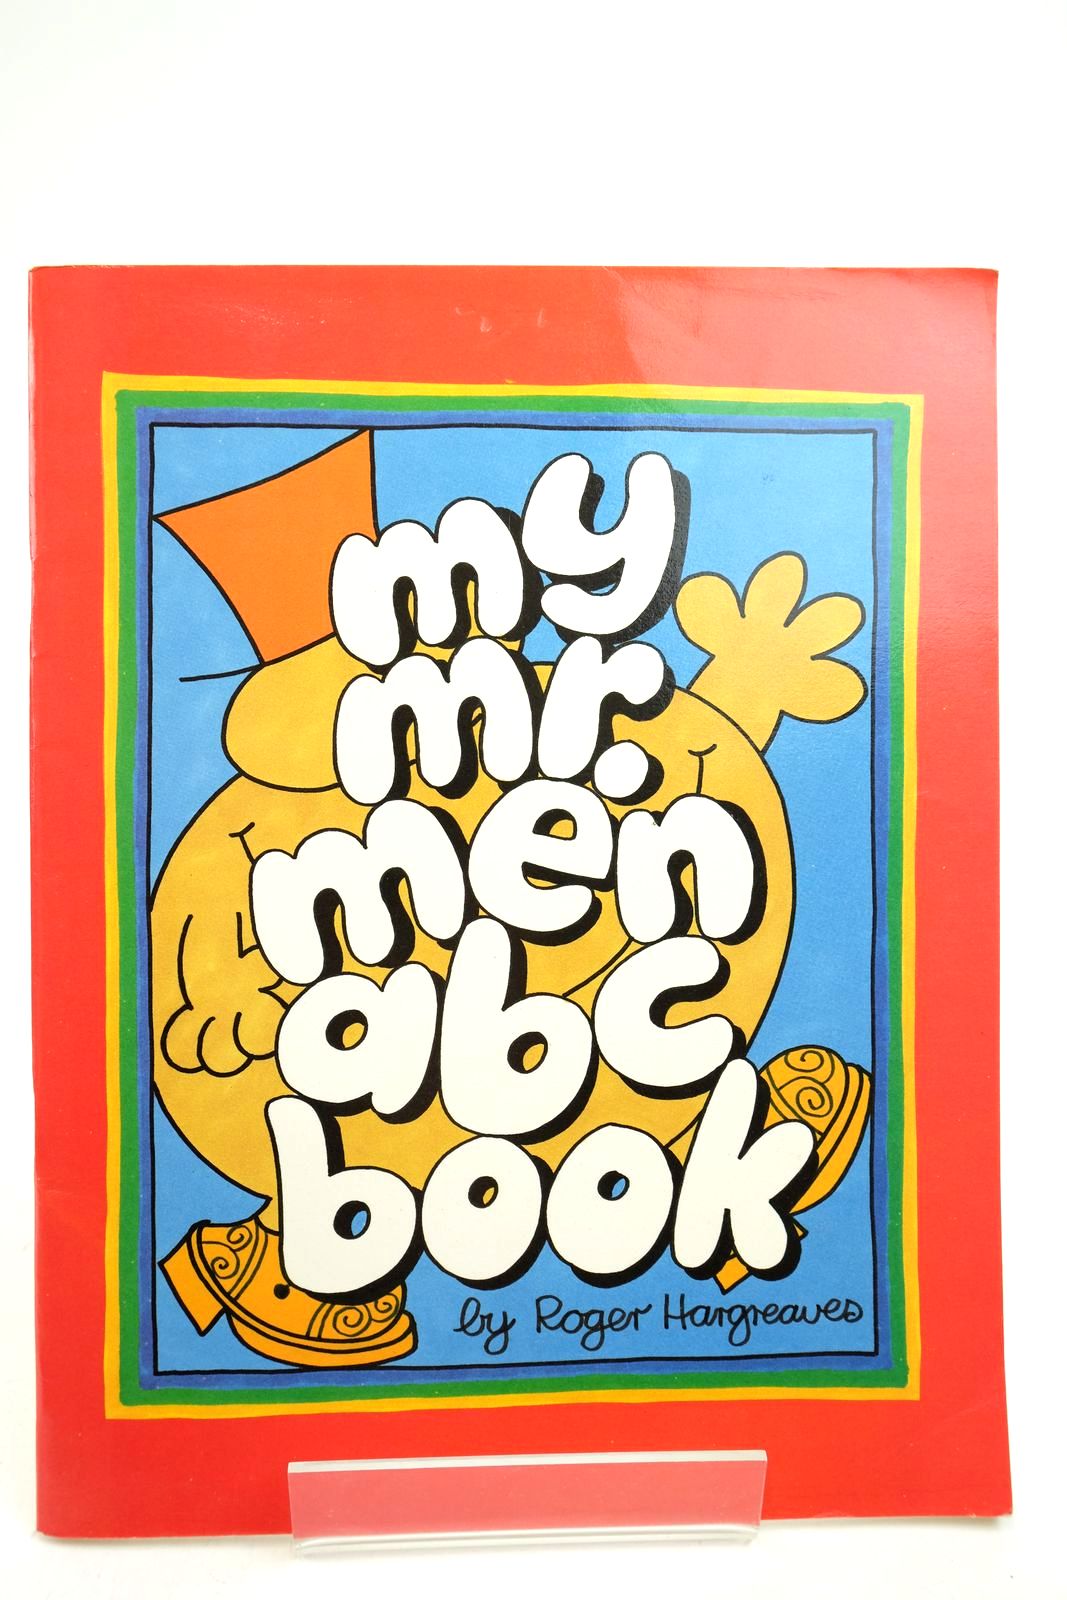 Photo of THE MR. MEN ABC- Stock Number: 2140342